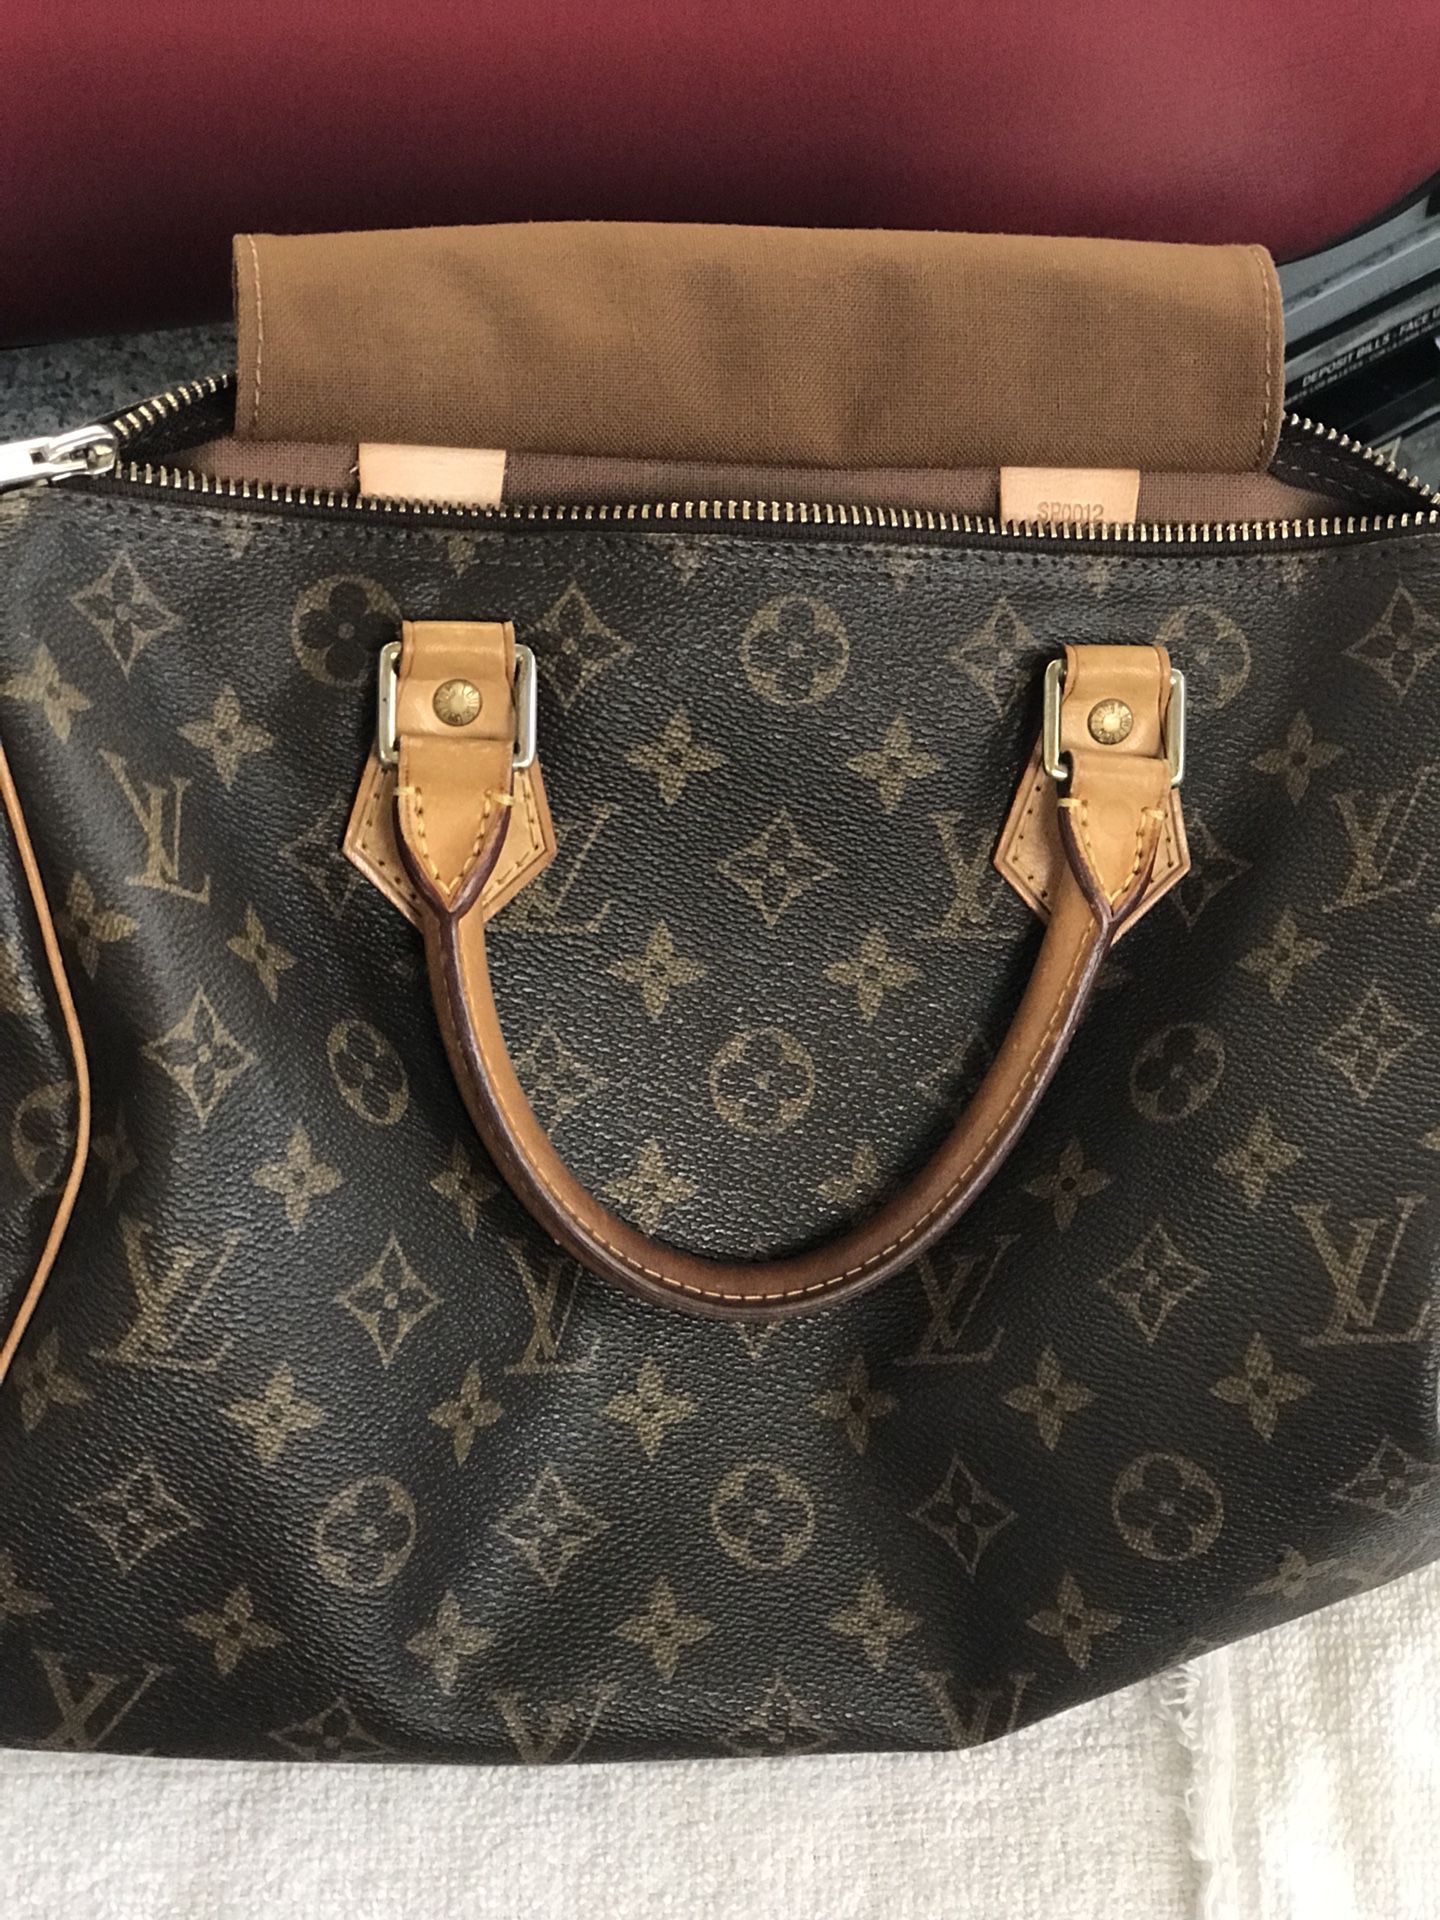 Used Authentic Louis Vuitton Speedy 30 crossbody for Sale in Vista, CA -  OfferUp